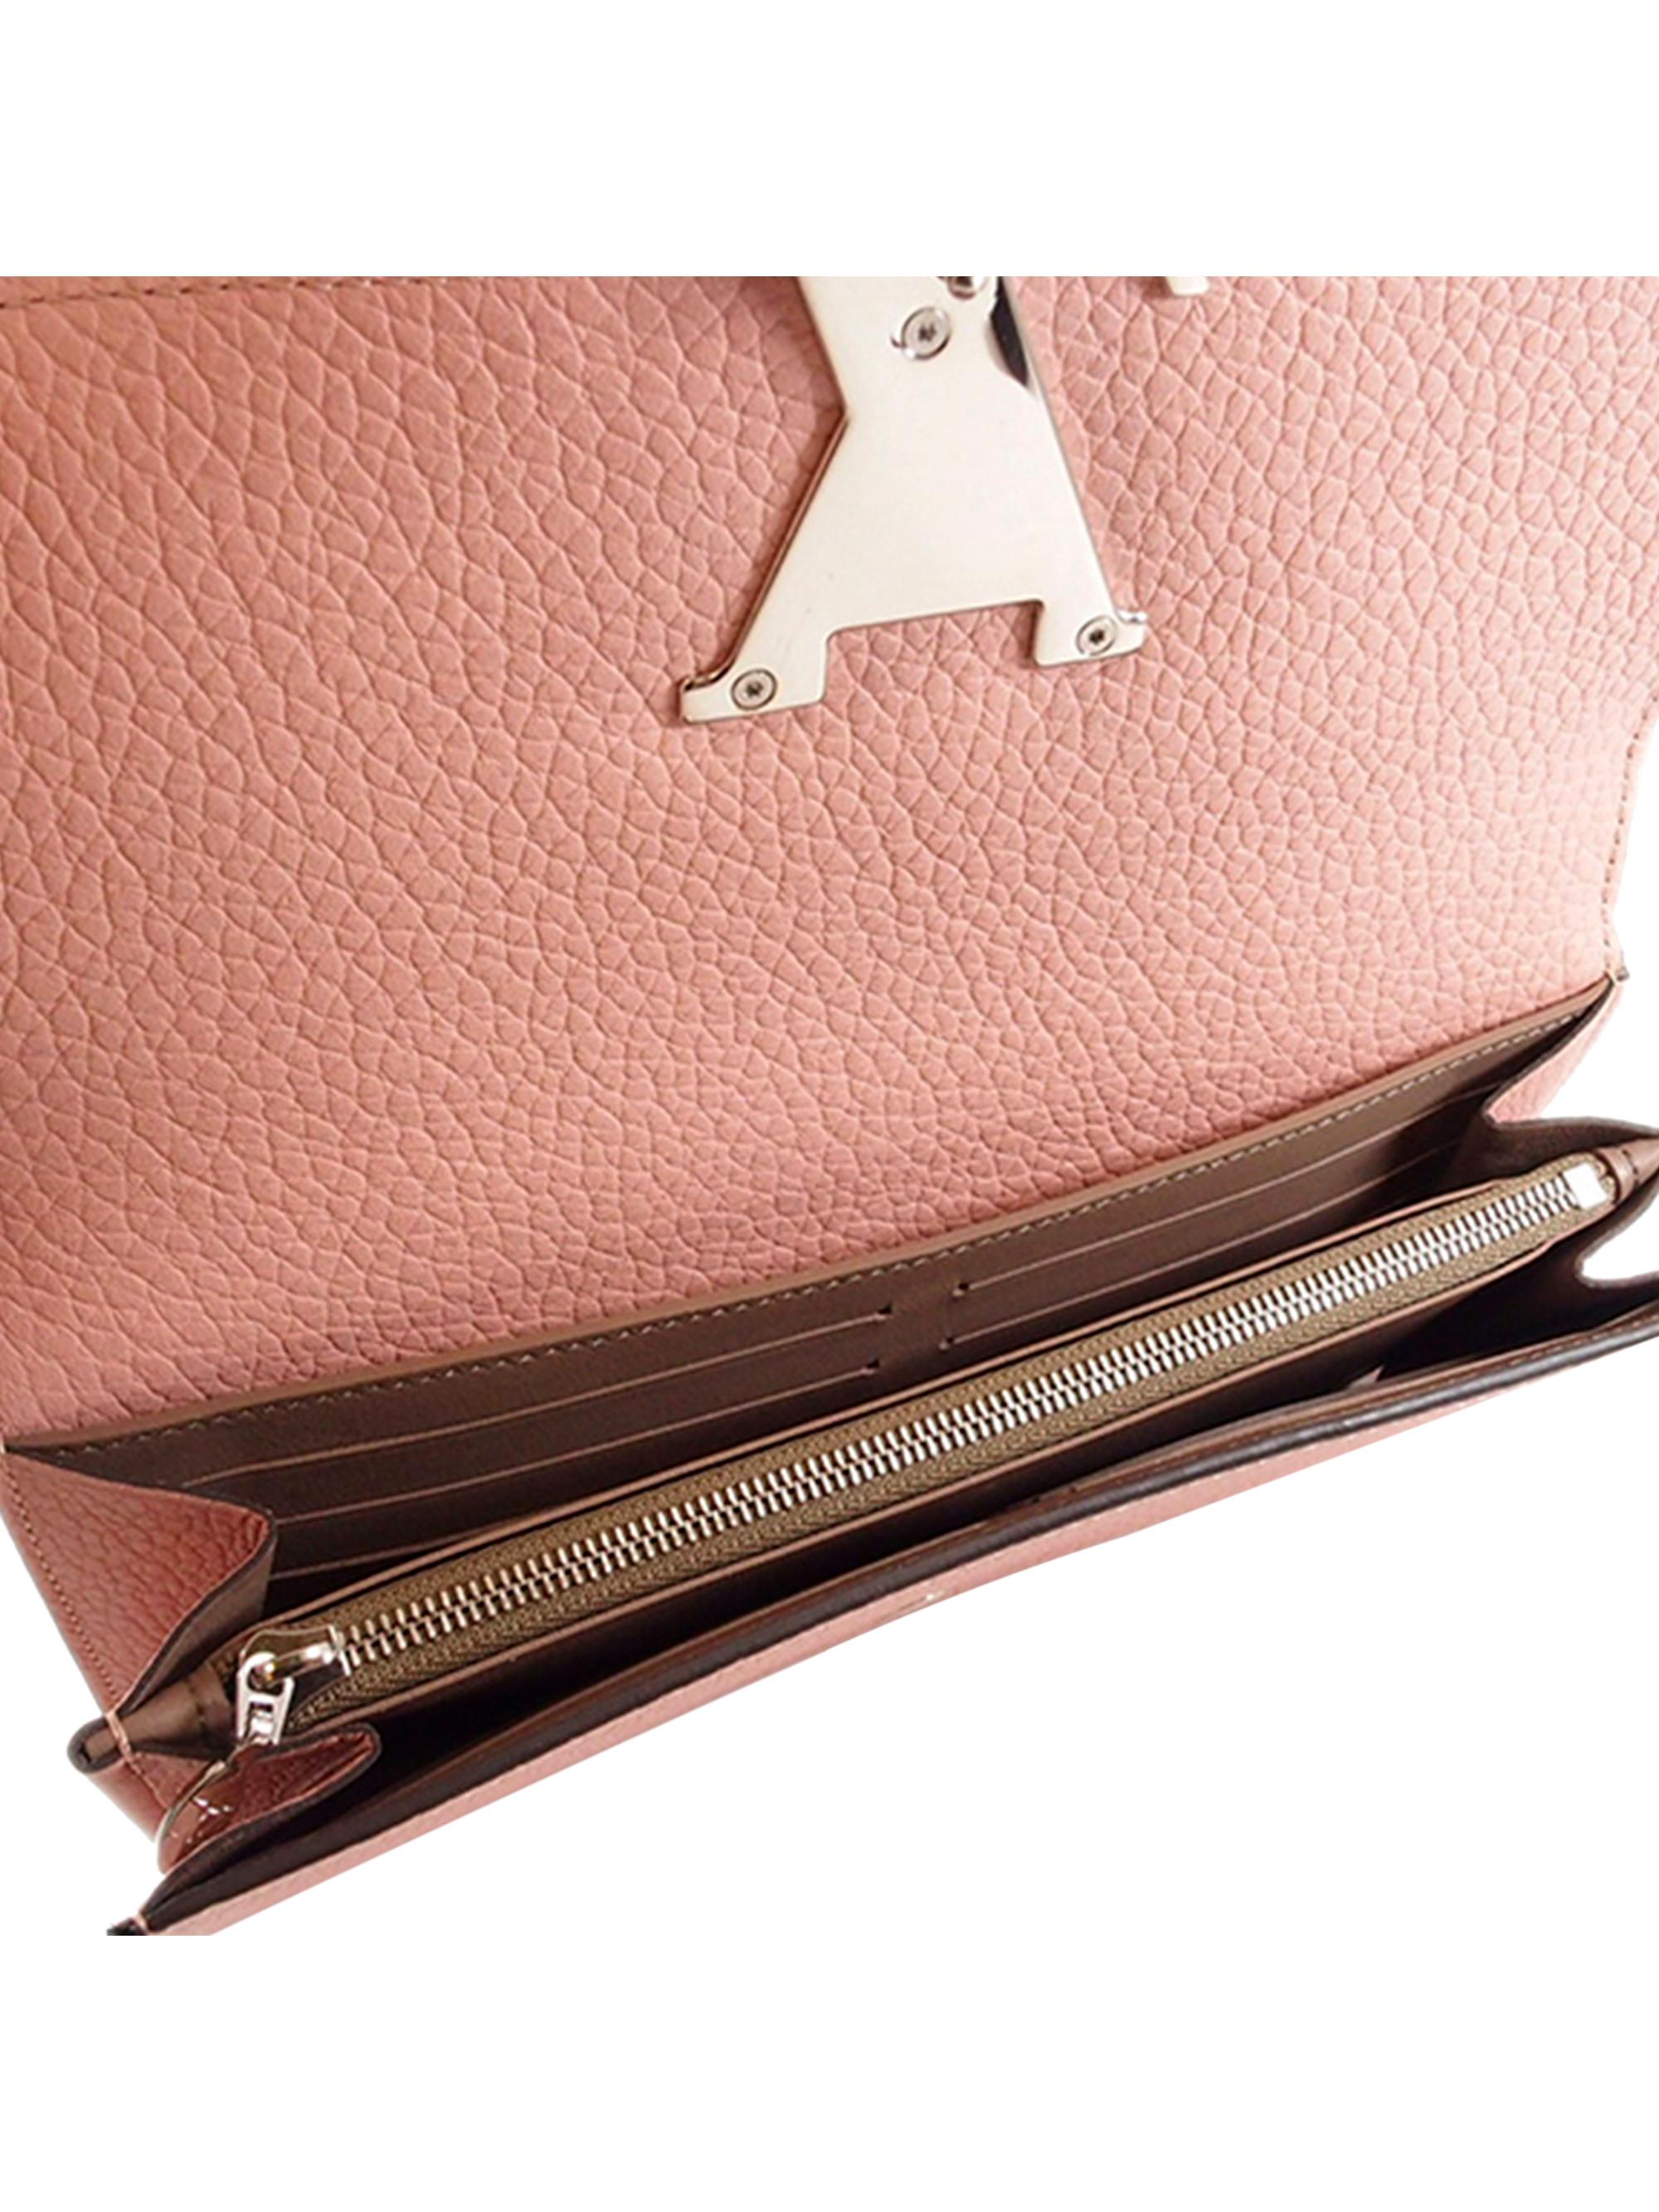 Pink Taurillon Leather Capucines Wallet